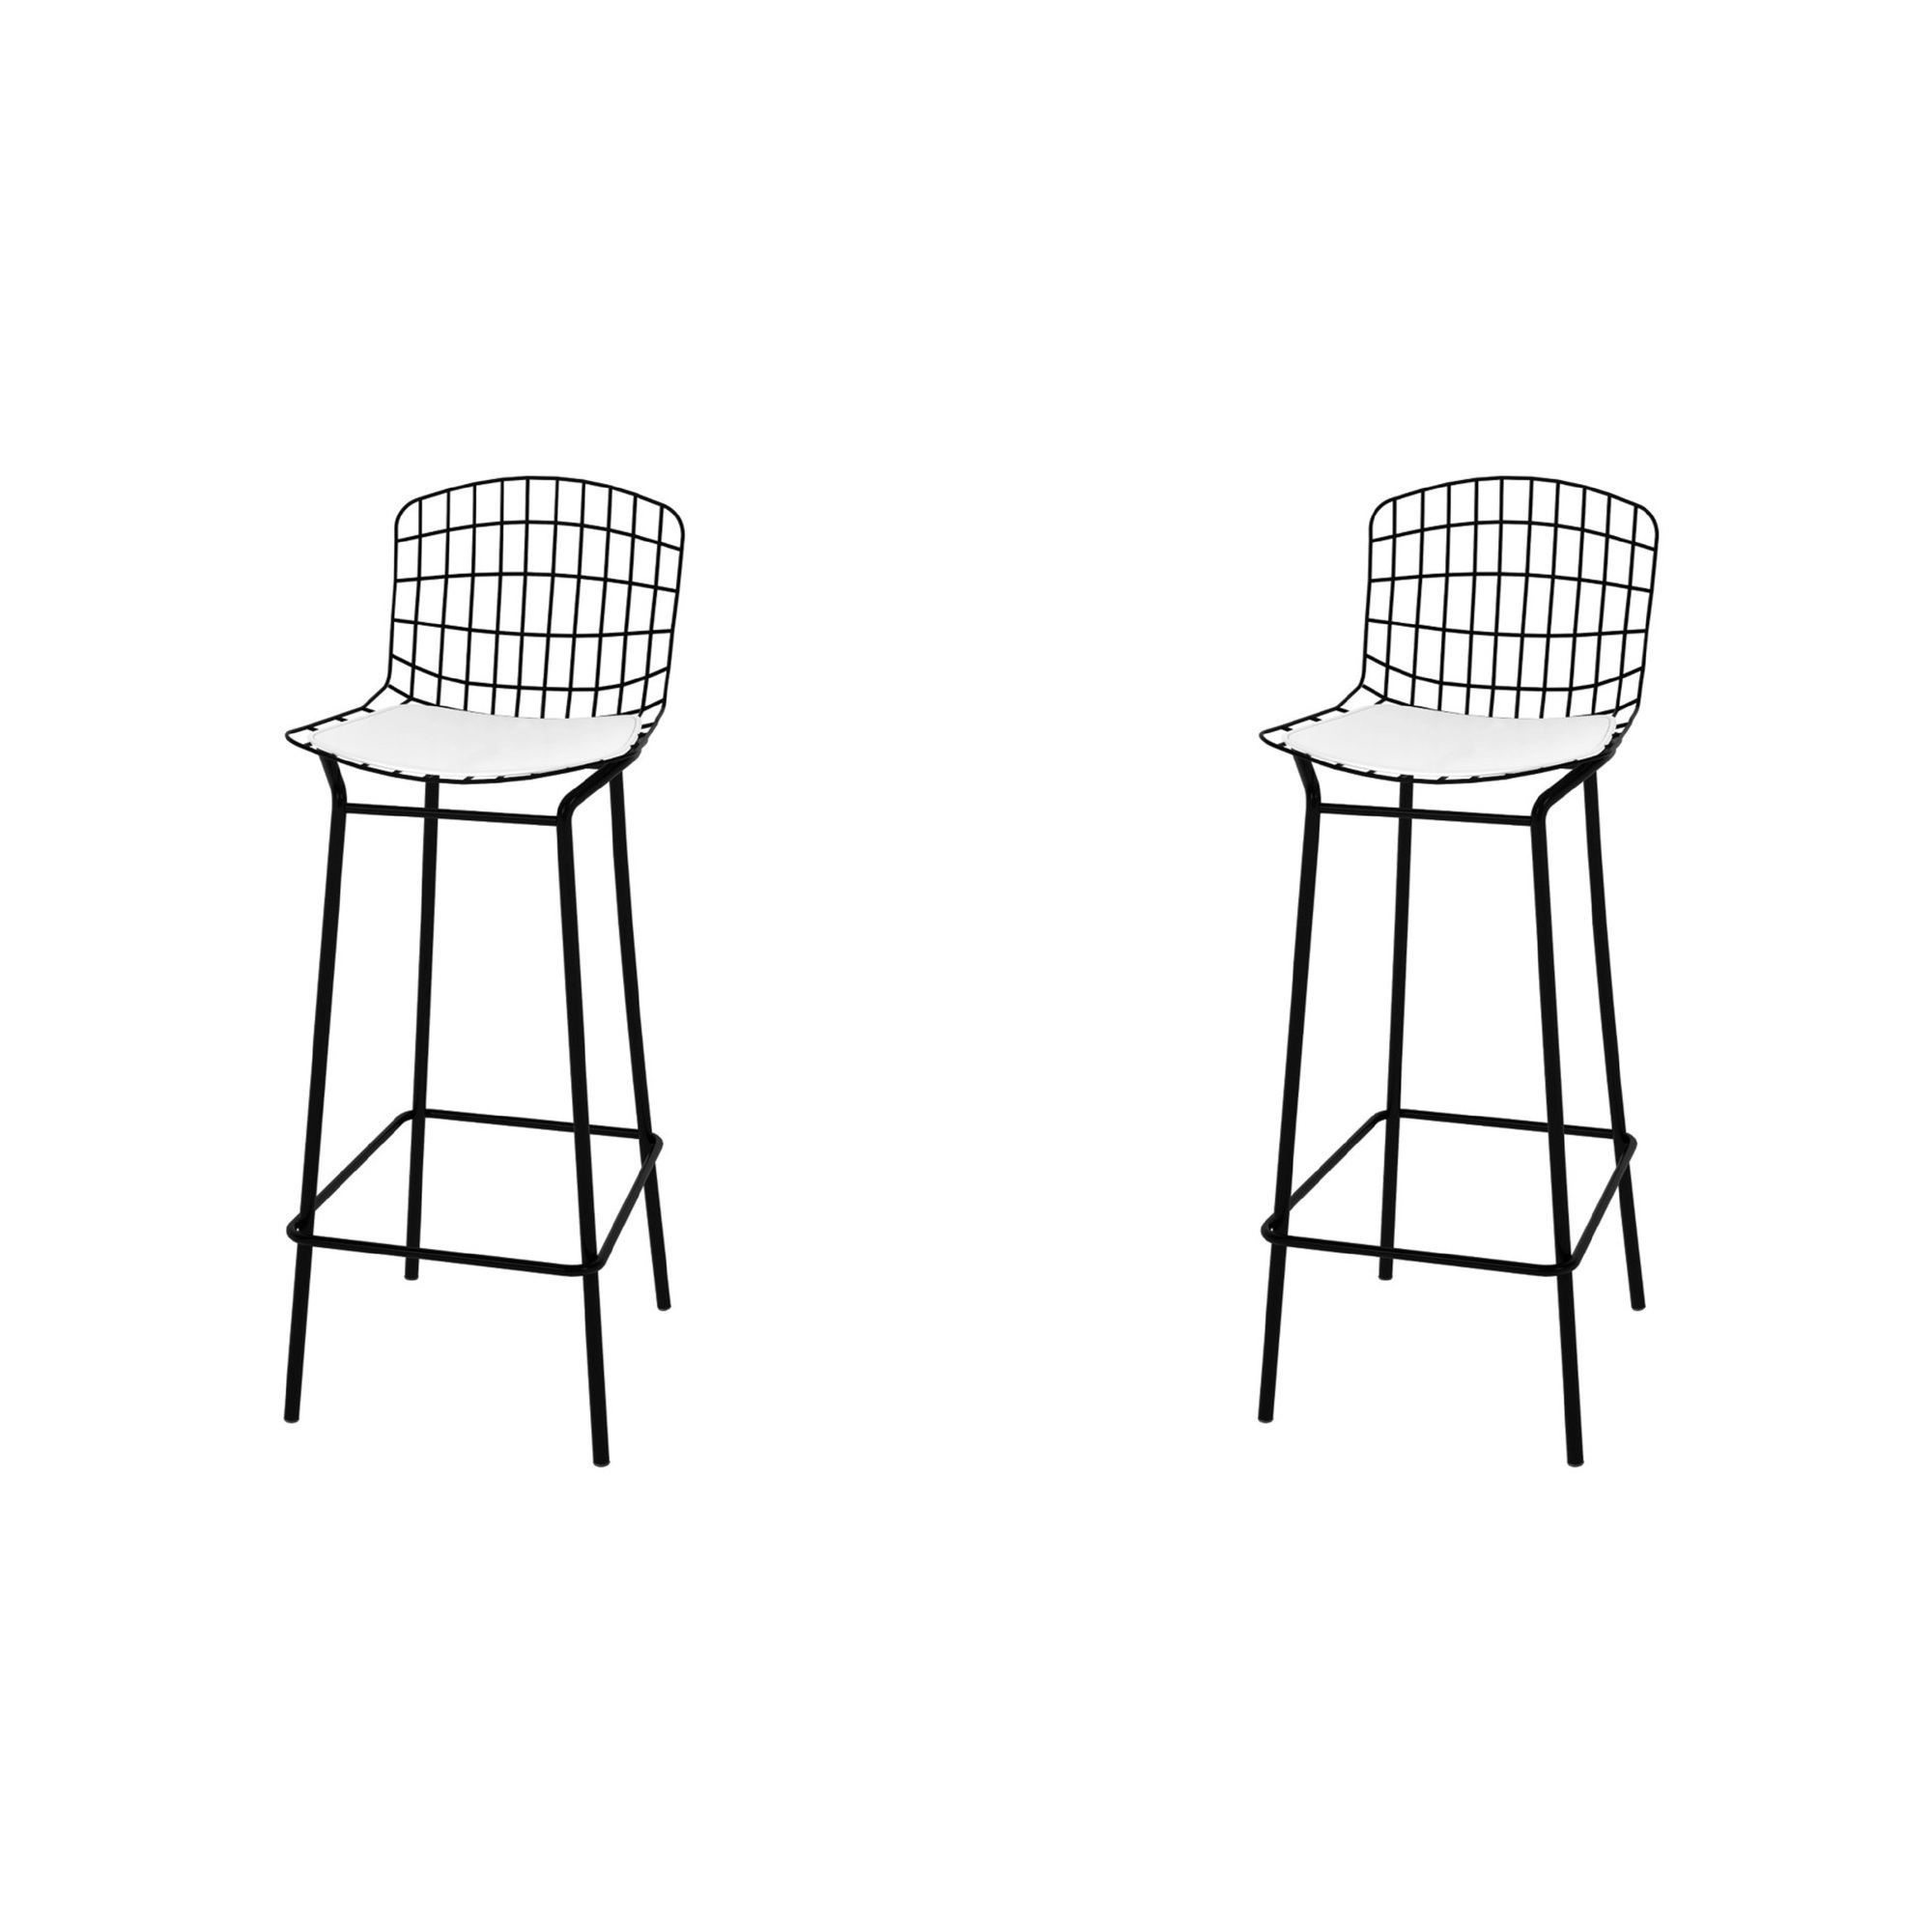 Manhattan Comfort, Madeline 41.73Inch Stool Set of 2 Cushion Black White, Primary Color Black, Included (qty.) 2 Model 2-198AMC